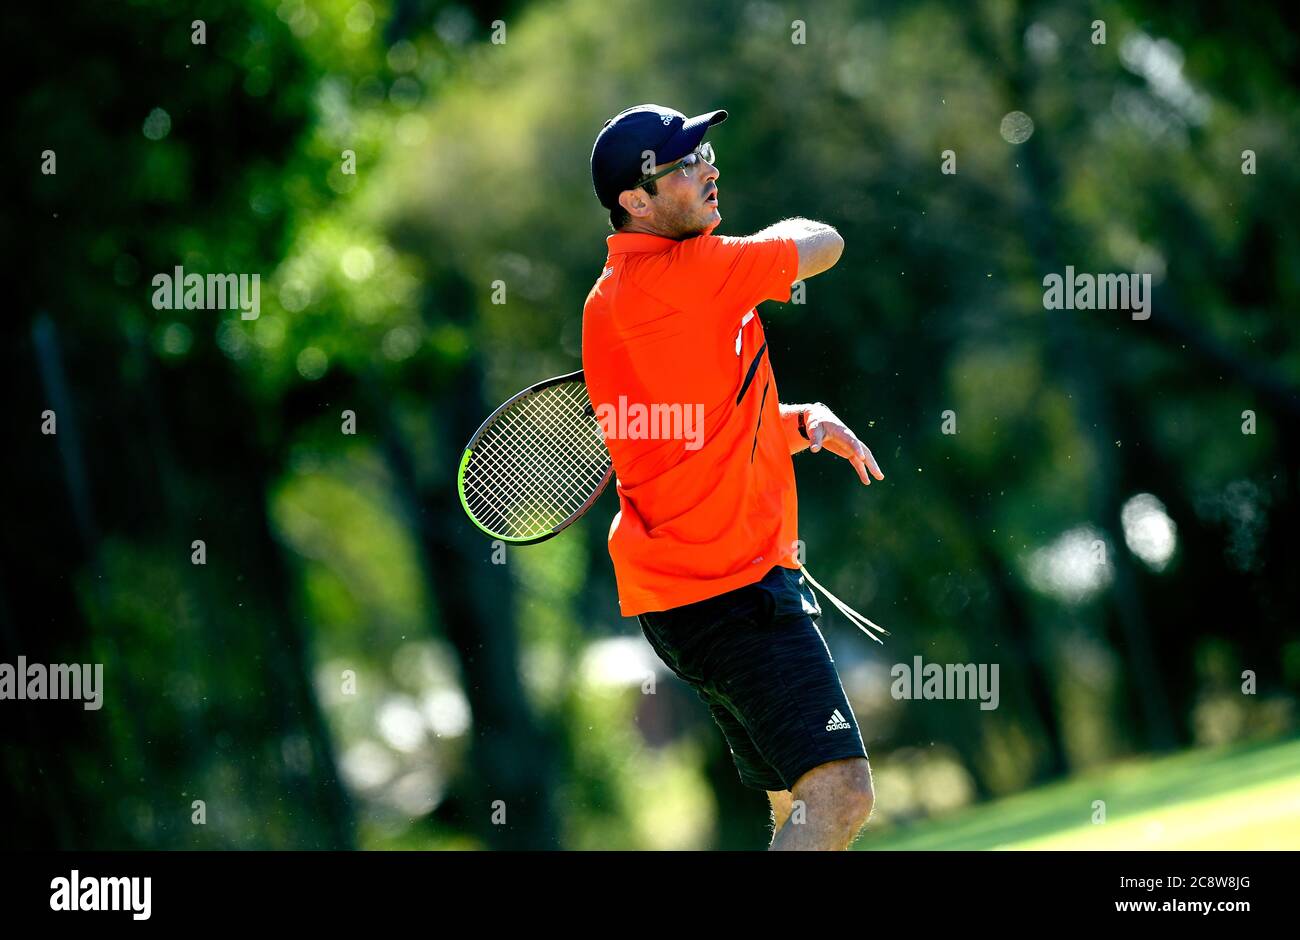 A tennis player strikes the ball during a grass roots tennis match in Victoria Australia Stock Photo